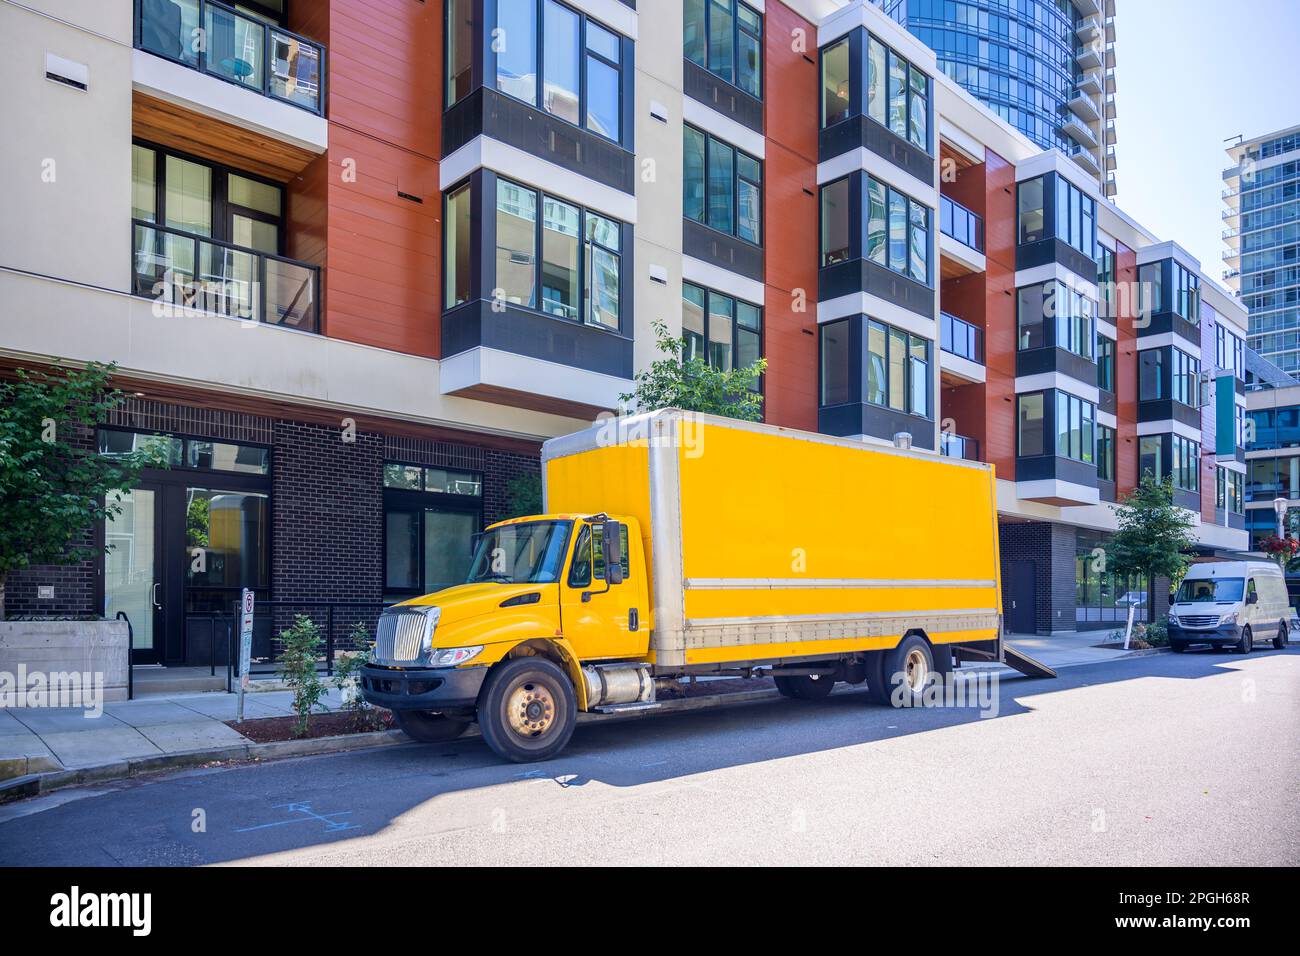 Industrial yellow middle rig day cab semi truck tractor with long box trailer make a delivery to customers to urban city apartment residential multi s Stock Photo